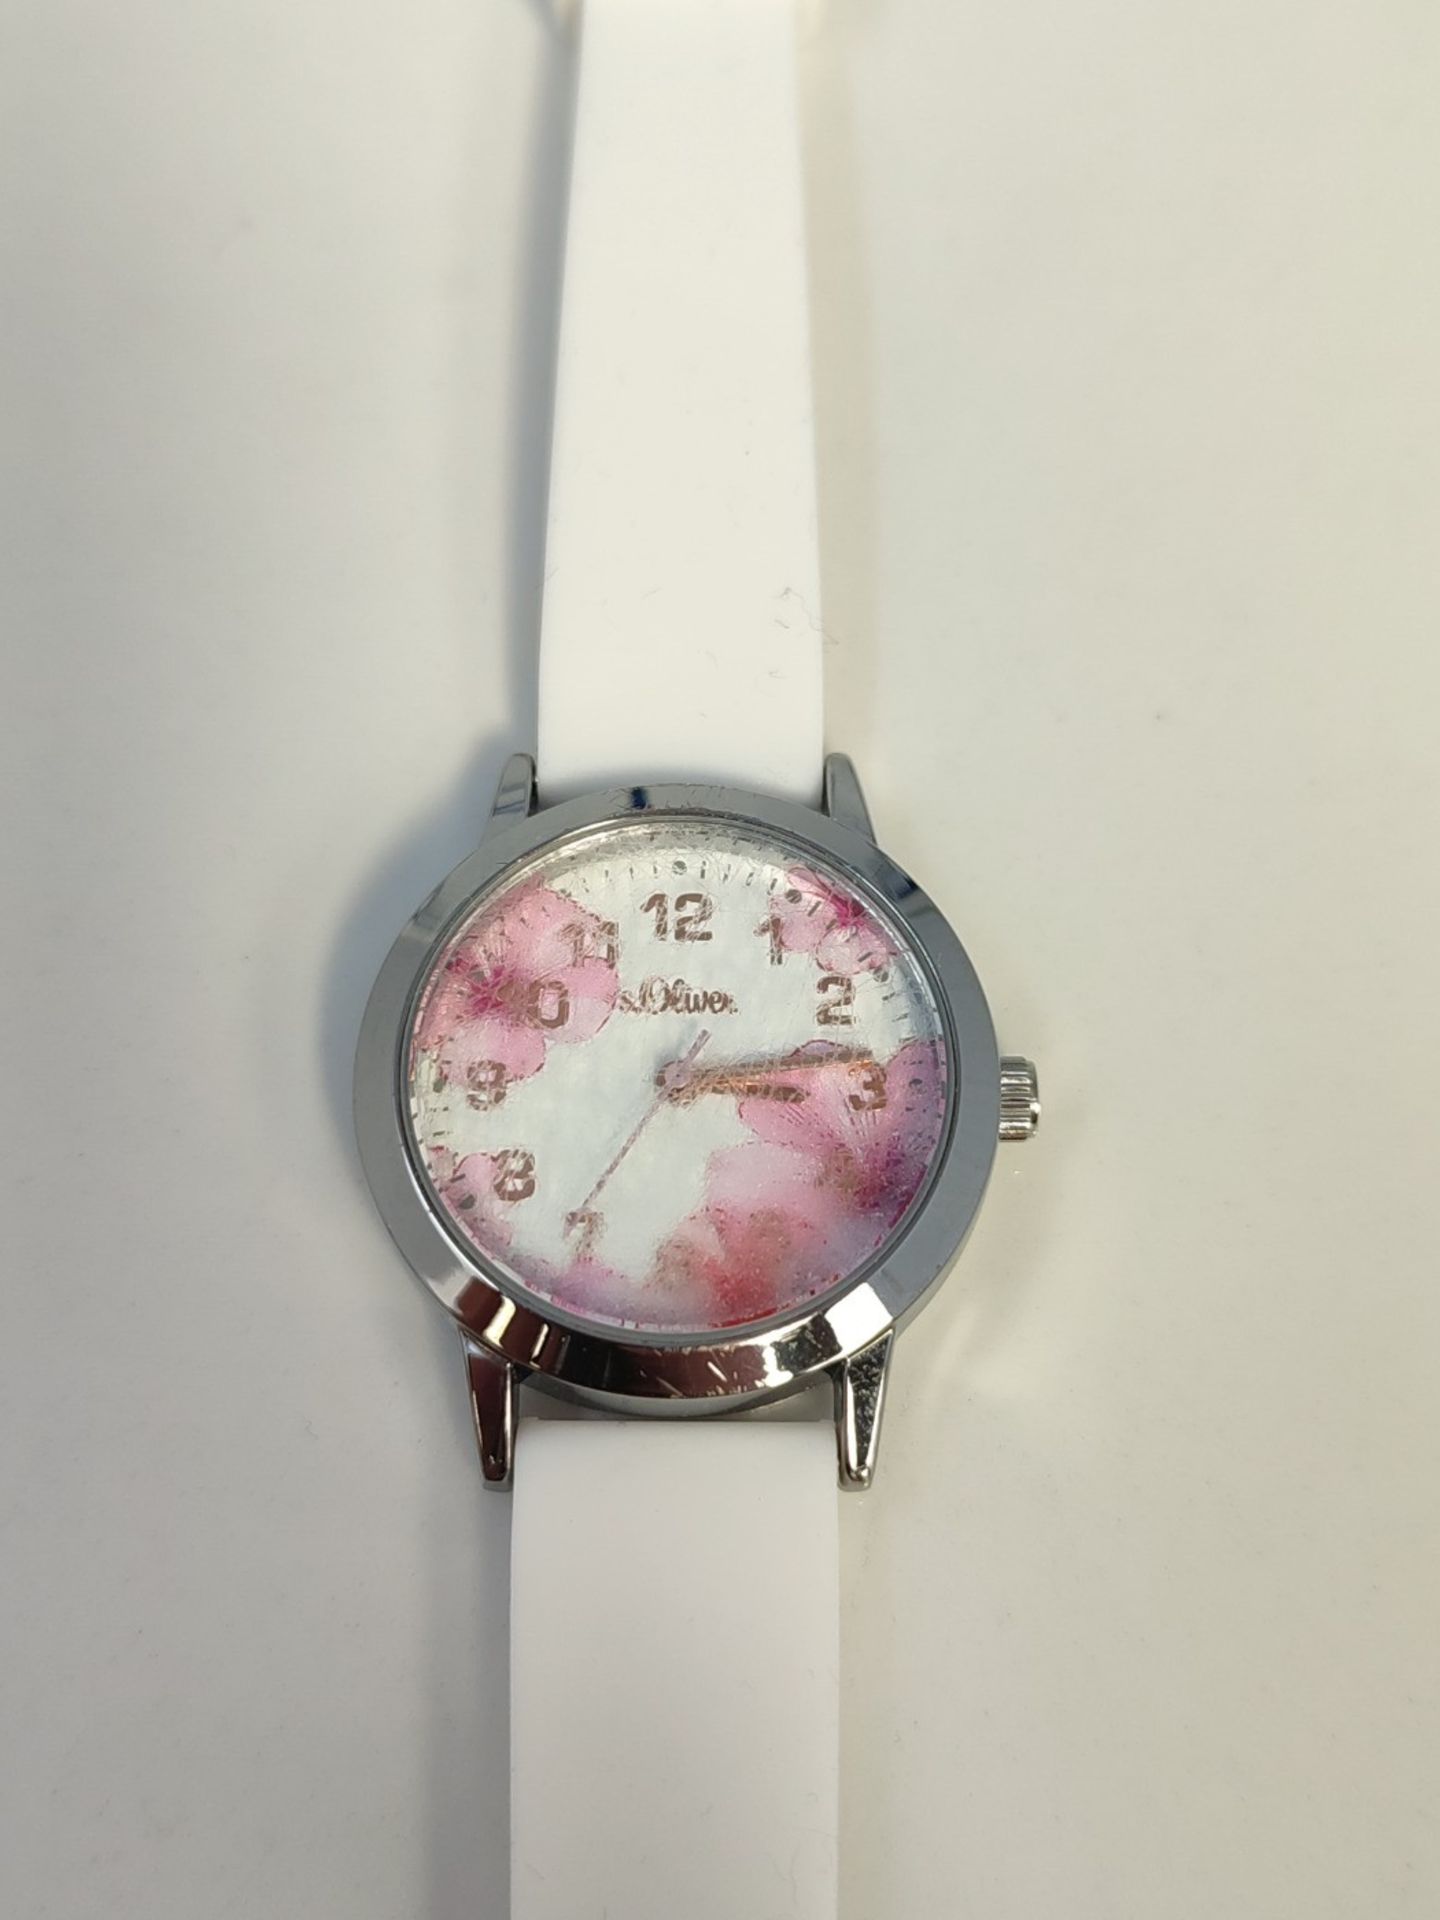 Oliver girls' analog quartz watch with silicone strap SO-4076-PQ. - Image 2 of 3